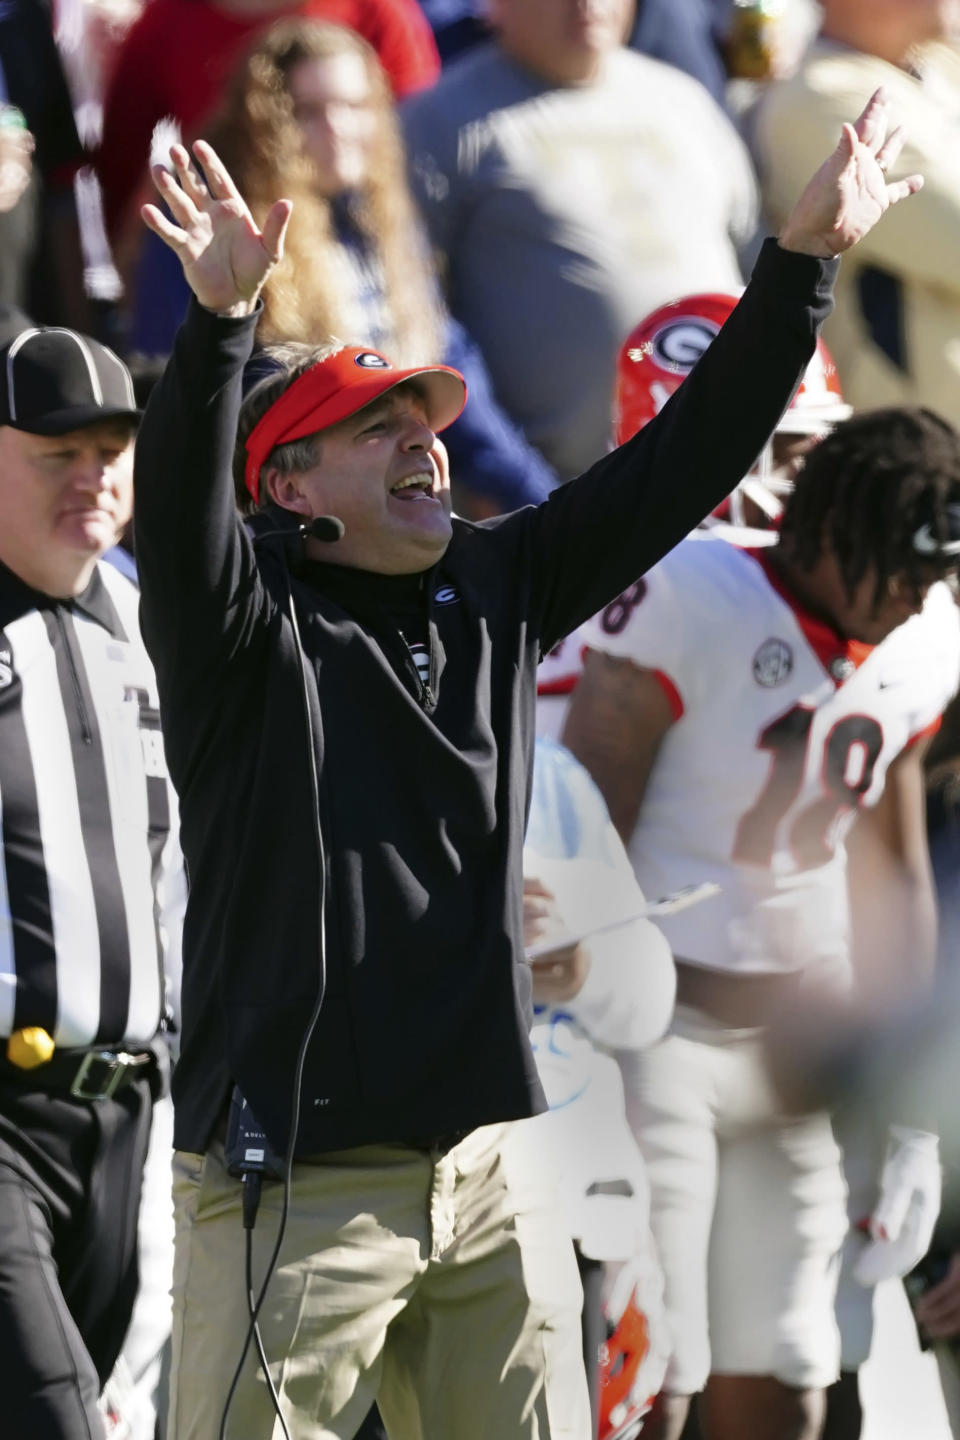 Georgia head coach Kirby Smart yells from the sideline in the second half of an NCAA college football game against Georgia Tech, Saturday, Nov. 27, 2021, in Atlanta. (AP Photo/John Bazemore)